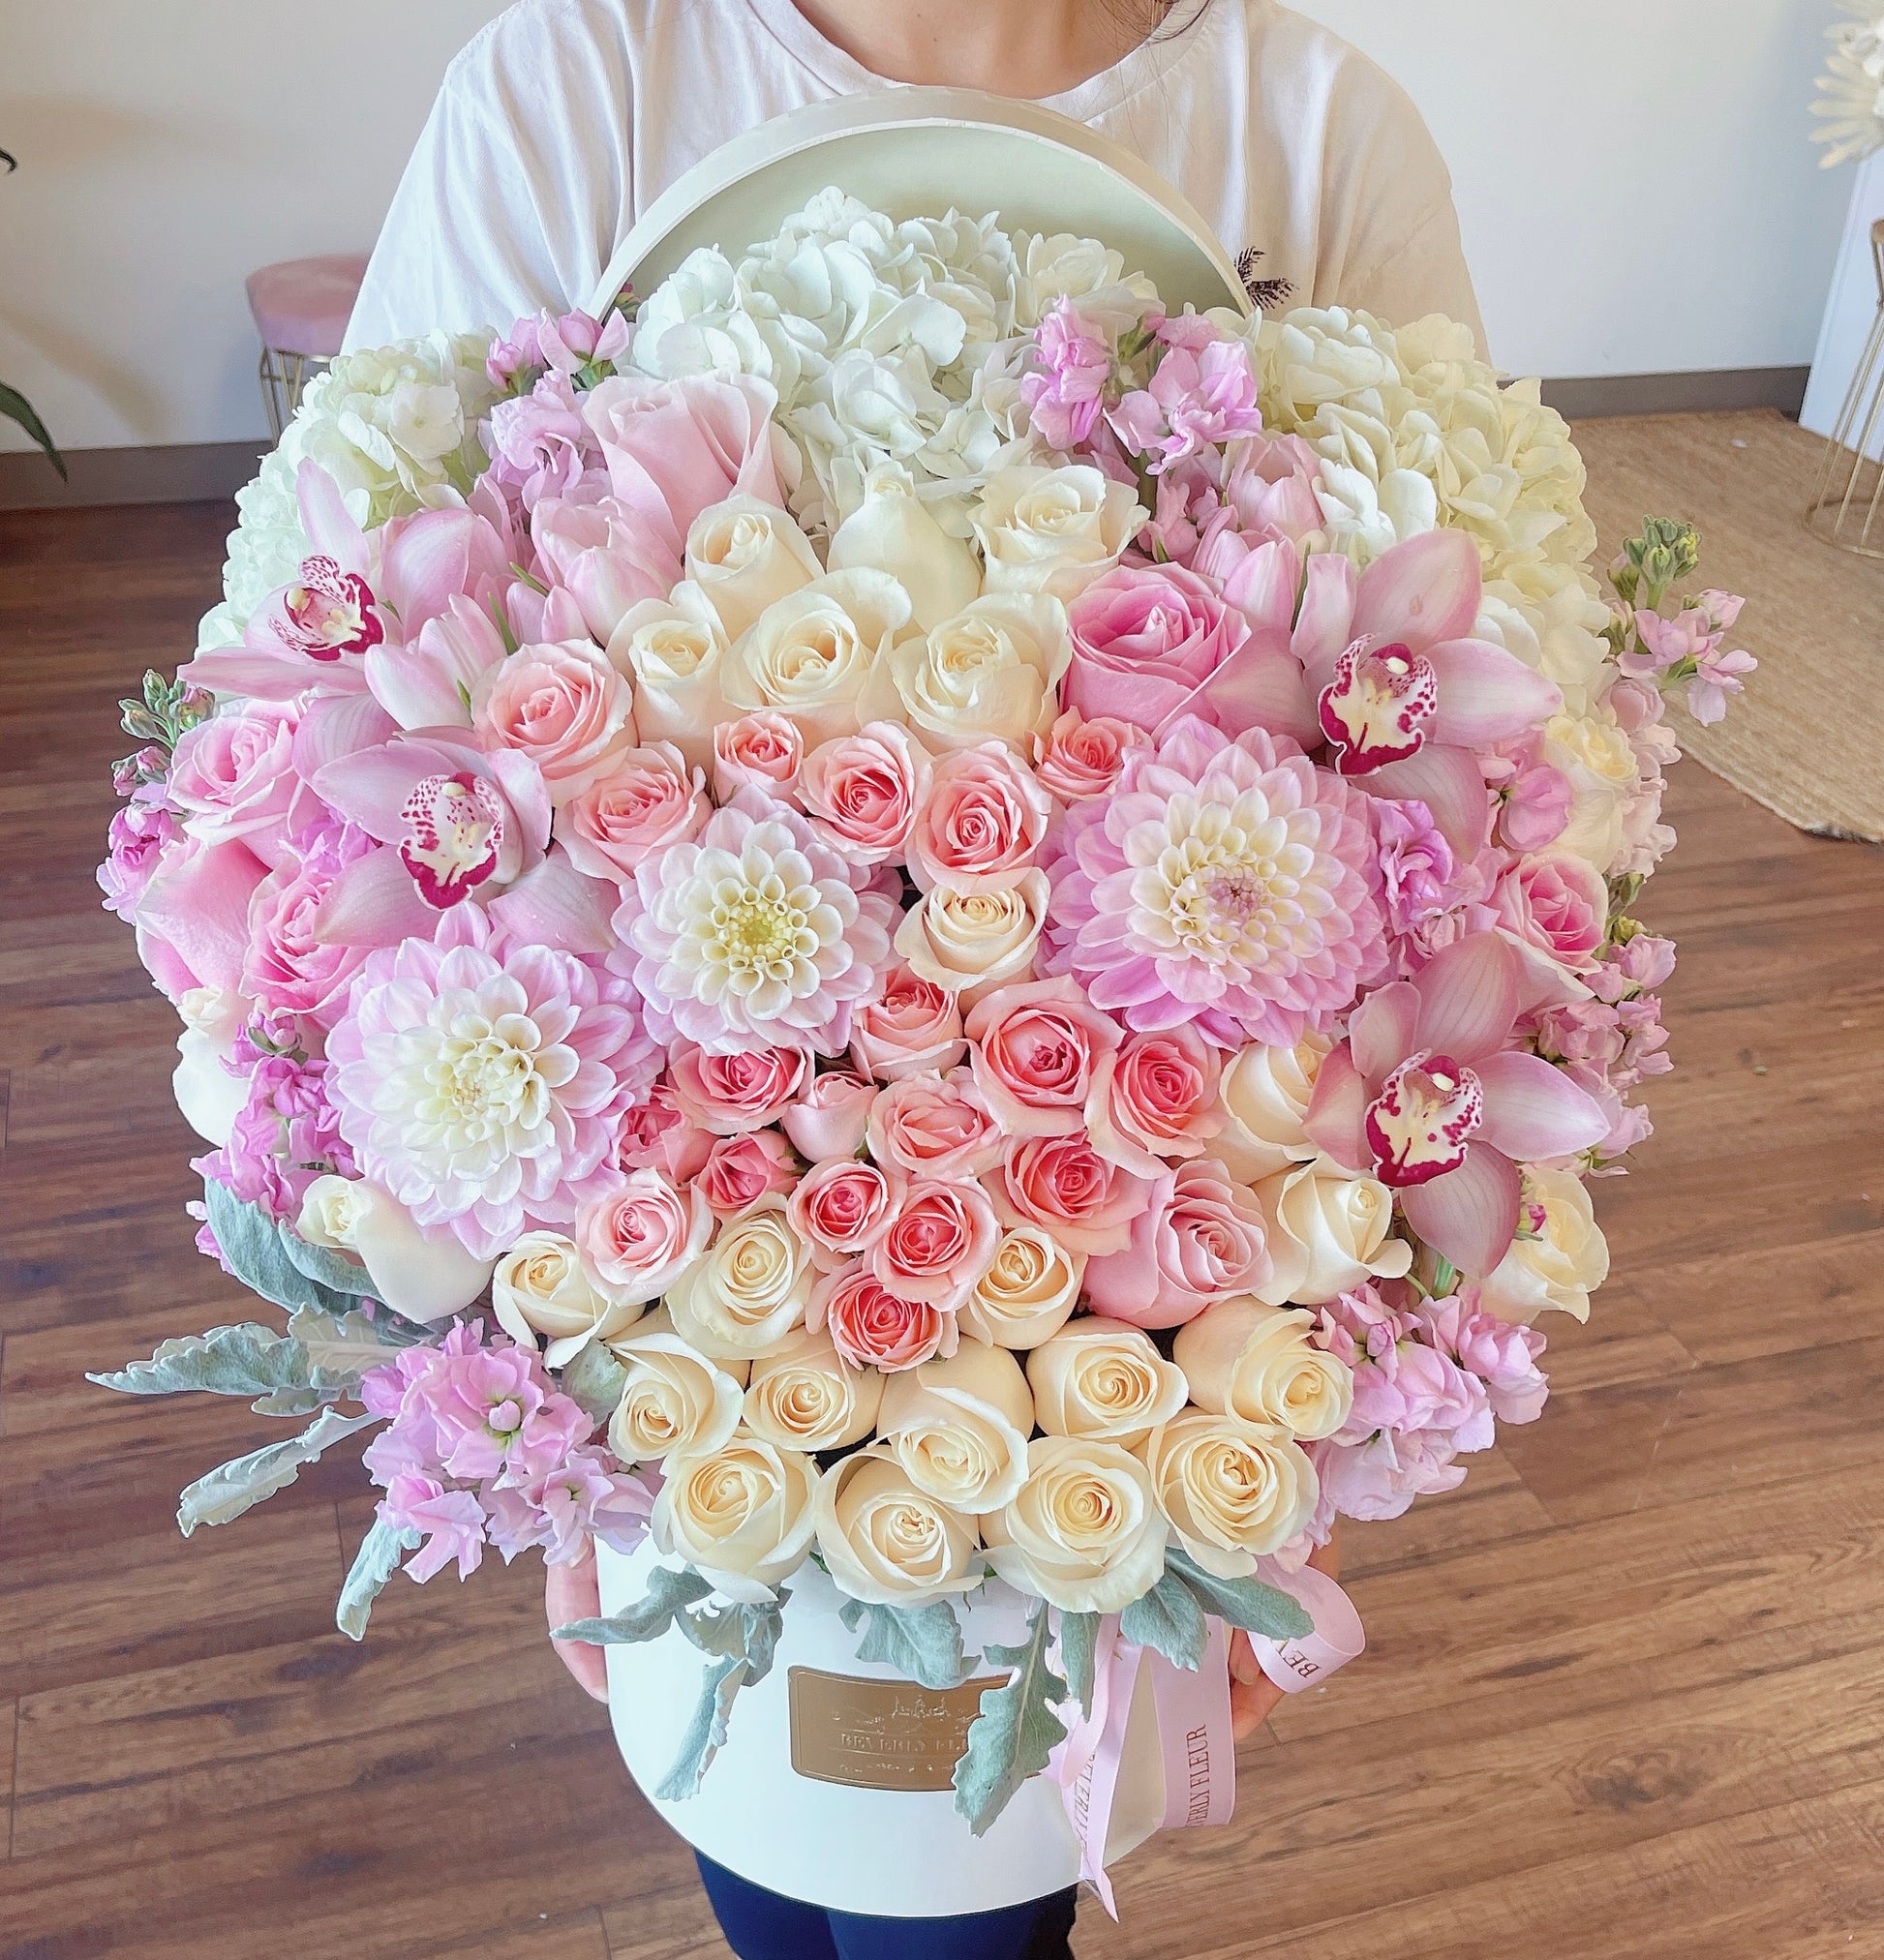 OC Beverly Flowers – Fountain Valley Flowers Delivery - Roses and Orchids  Wooden Box